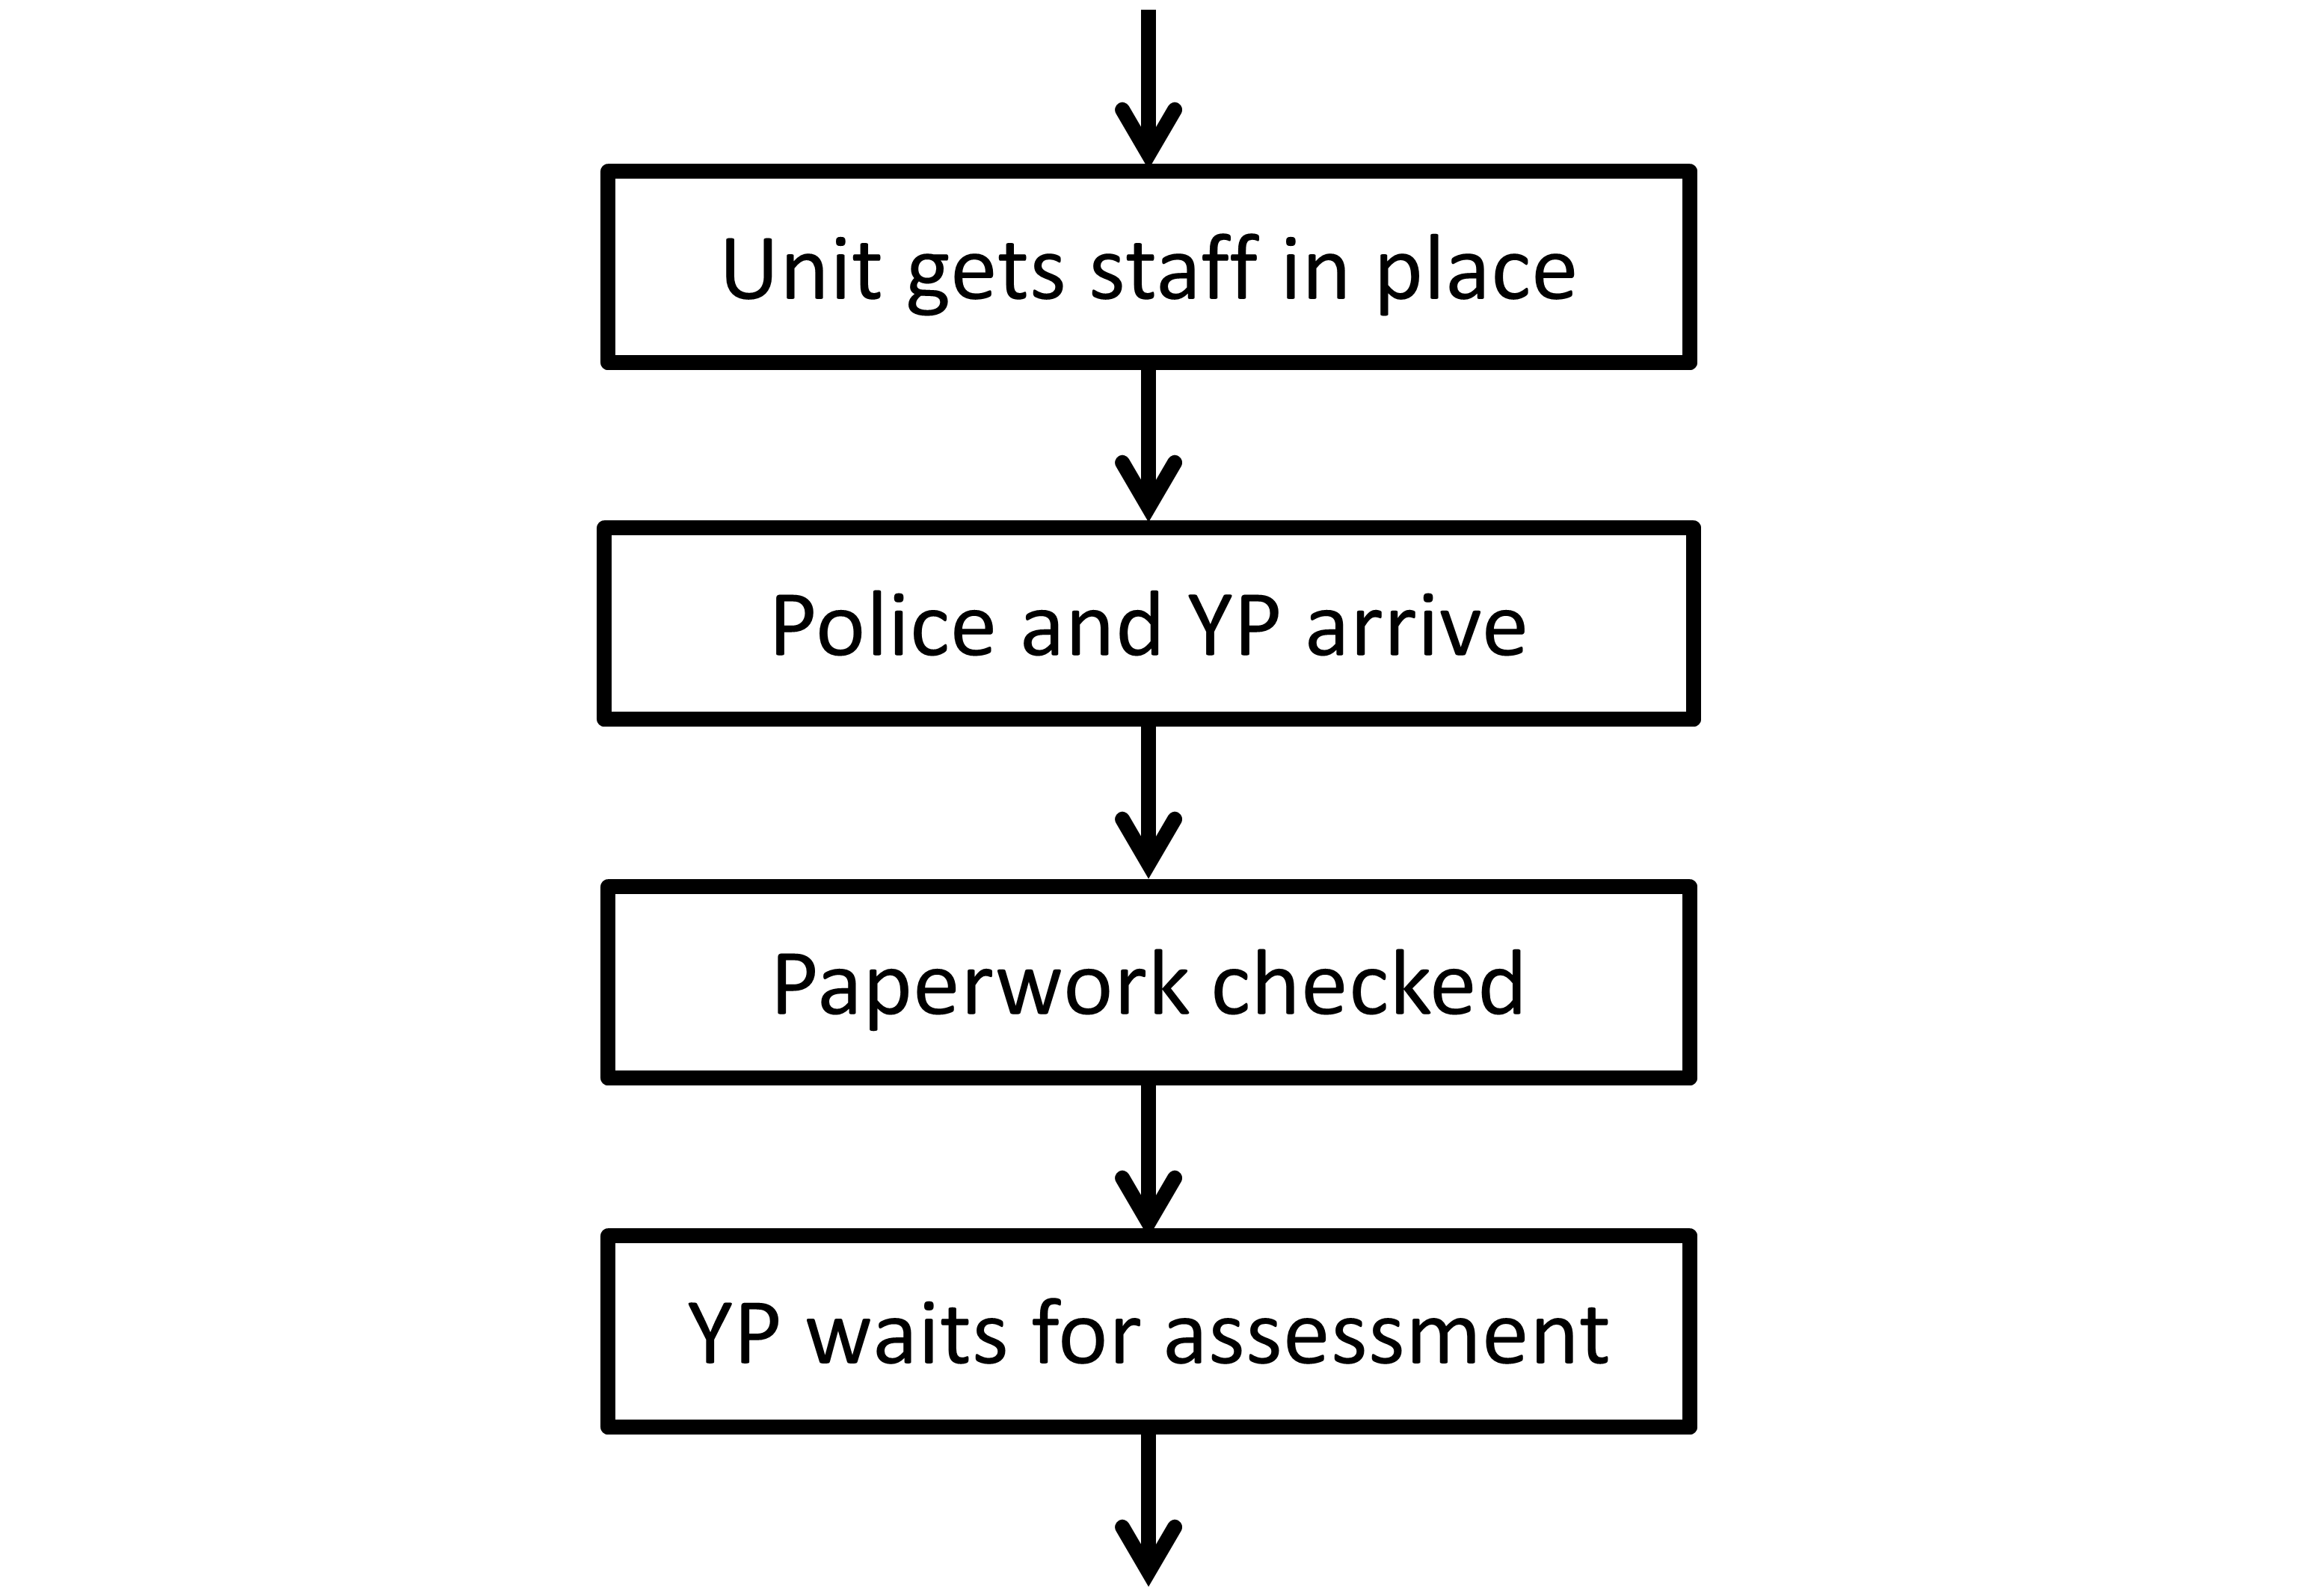 A portion of a process diagram, showing the steps: Unit gets staff in place, Police and YP arrive, Paperwork checked, YP waits for assessment.